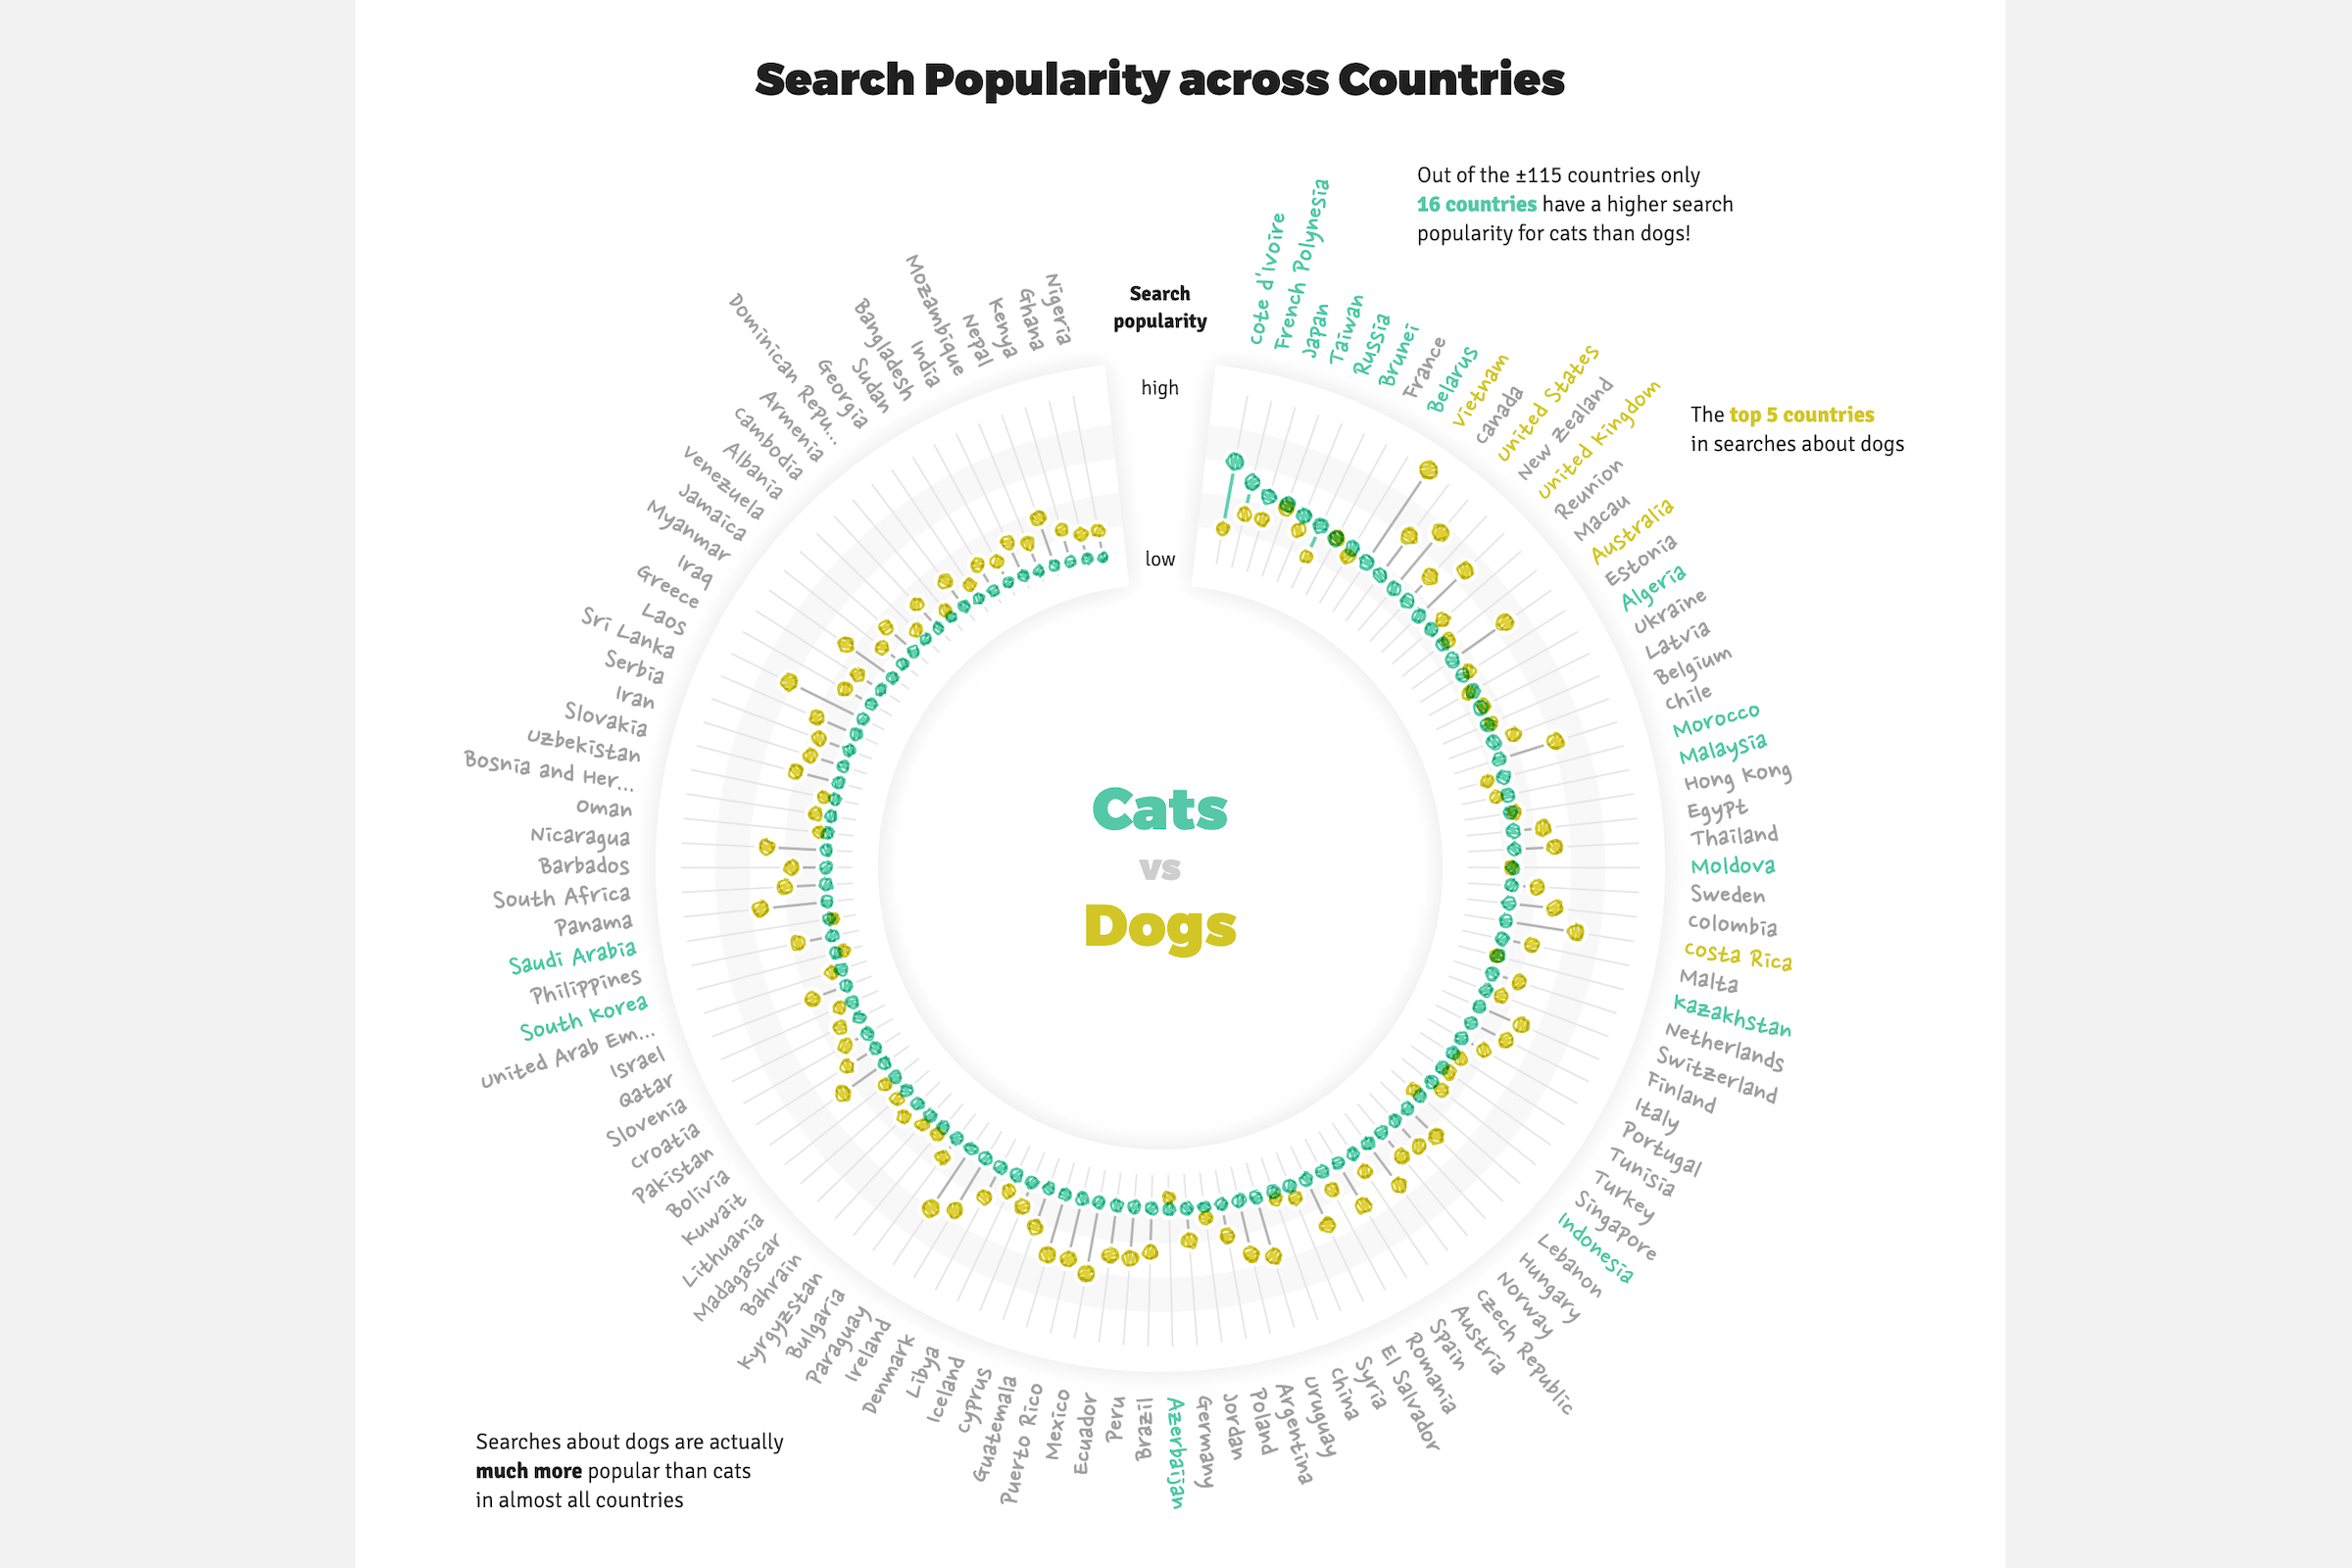 The 'cats vs dogs' visual from the perspective of cats